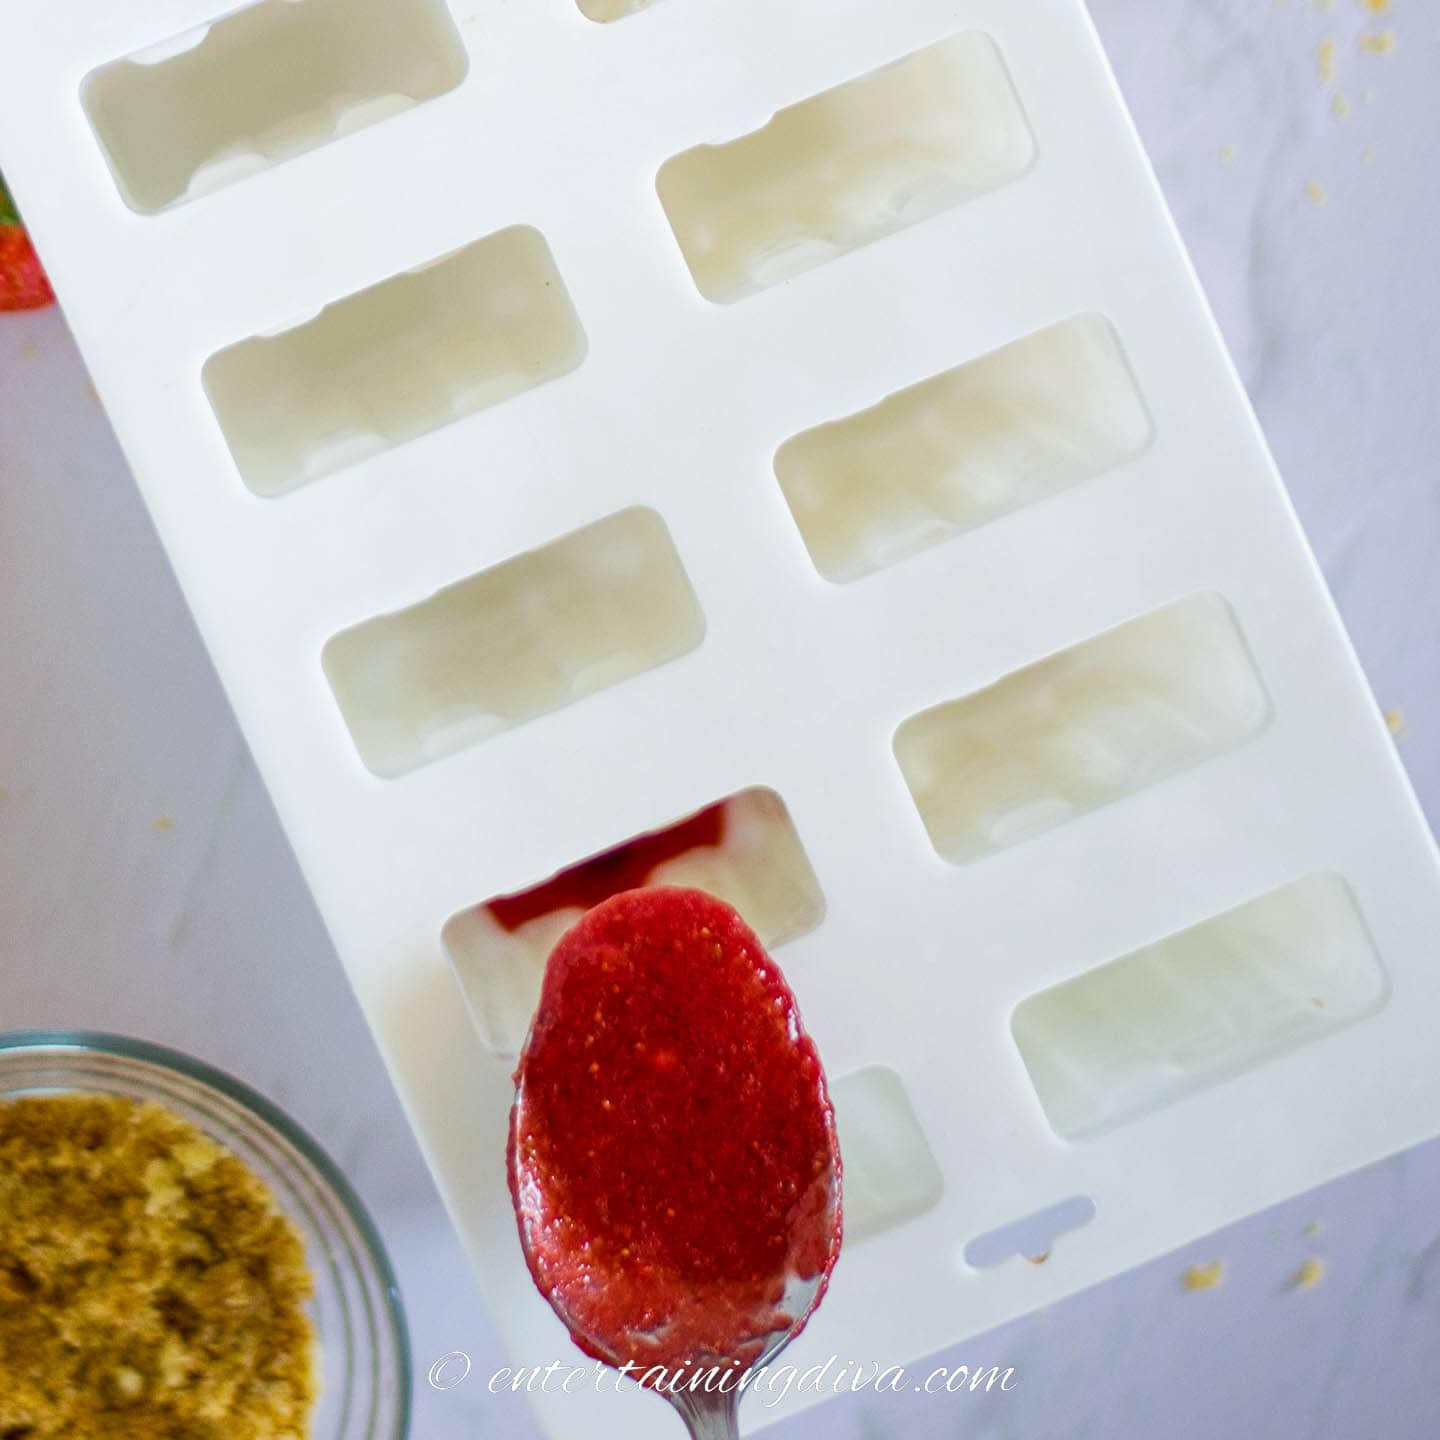 strawberry puree being added to popsicle mold